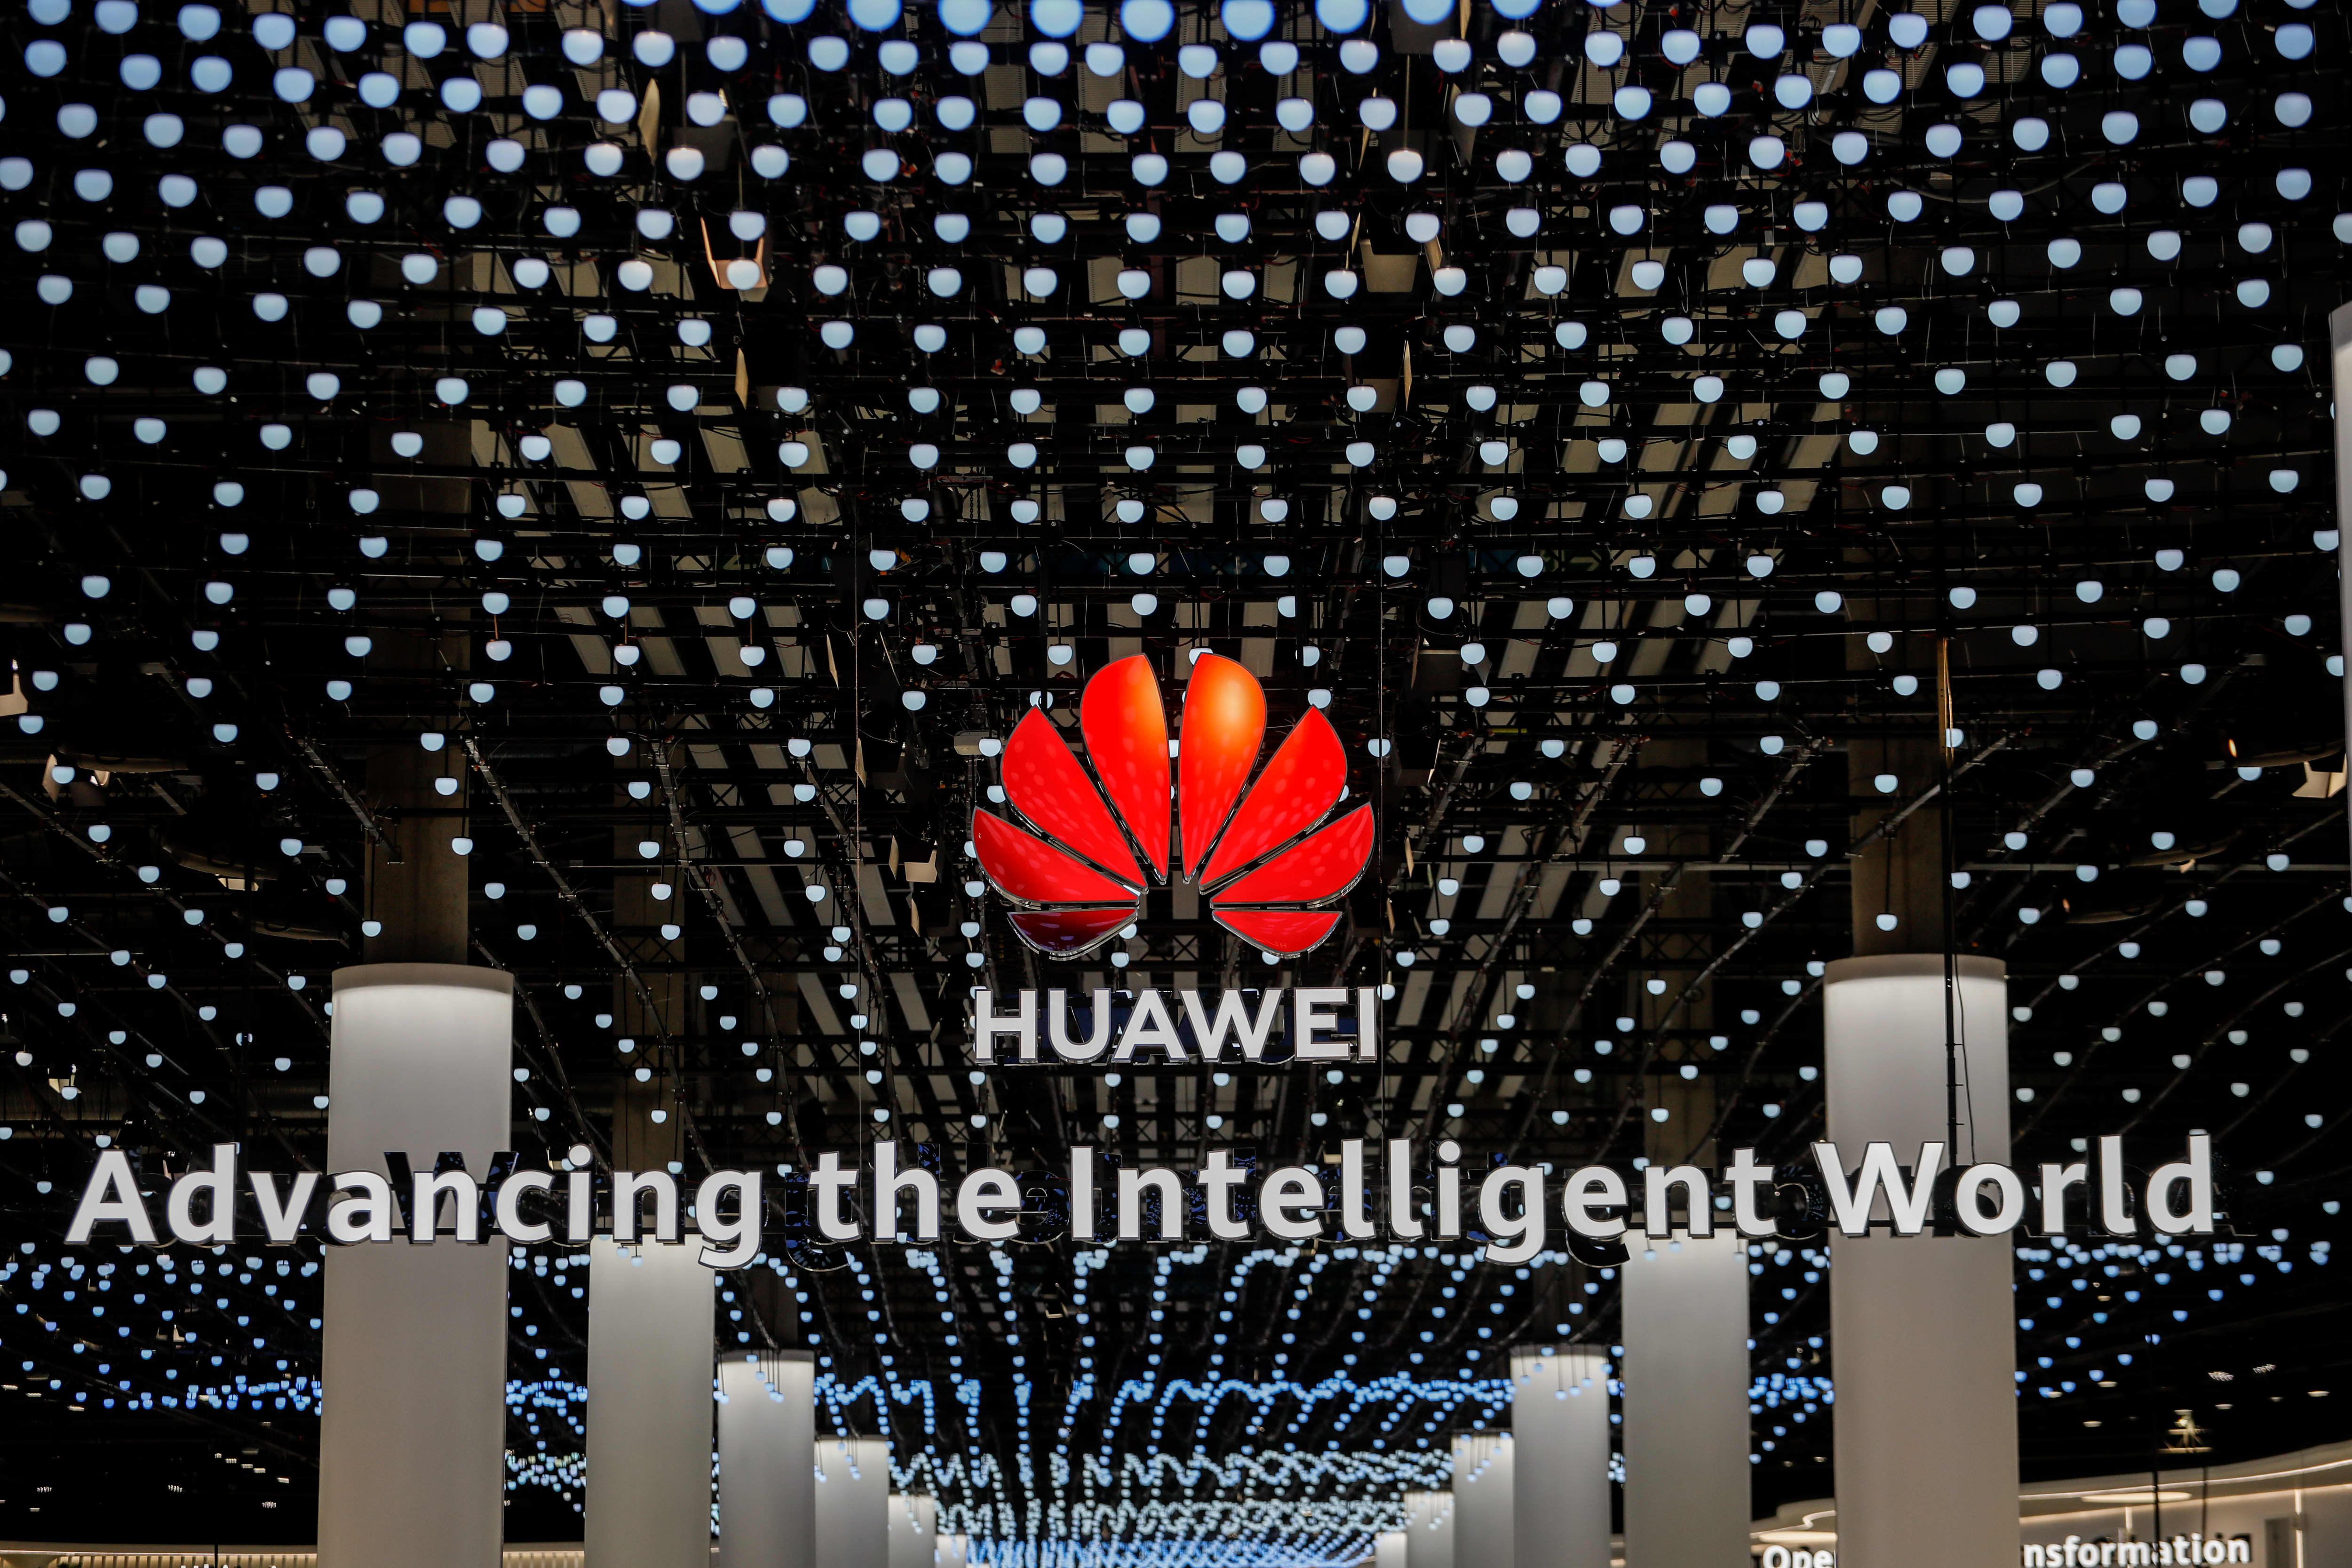 Huawei’s Stellar Comeback: Overcoming Restrictions and Soaring in the Smartphone Market